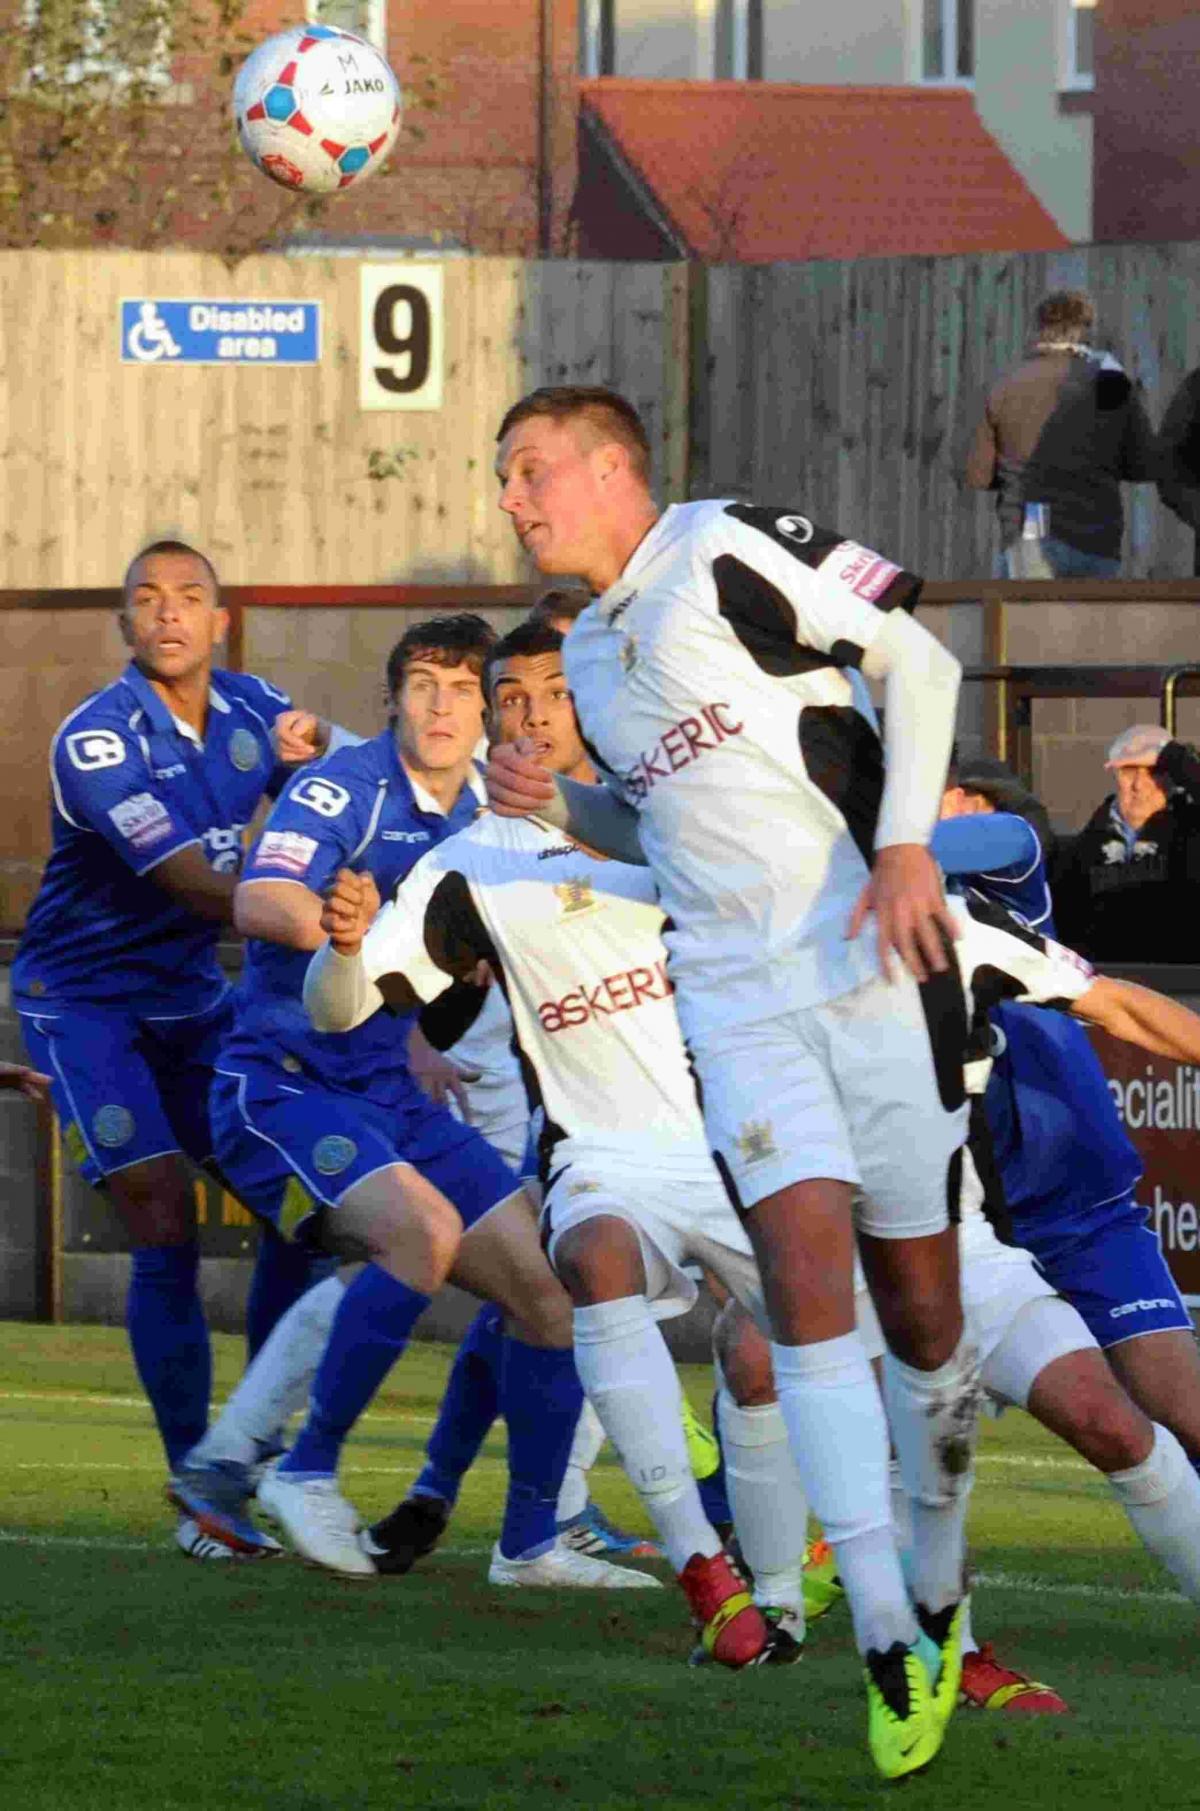 Relive Salisbury's thrilling 3-2 win over Macclesfield Town